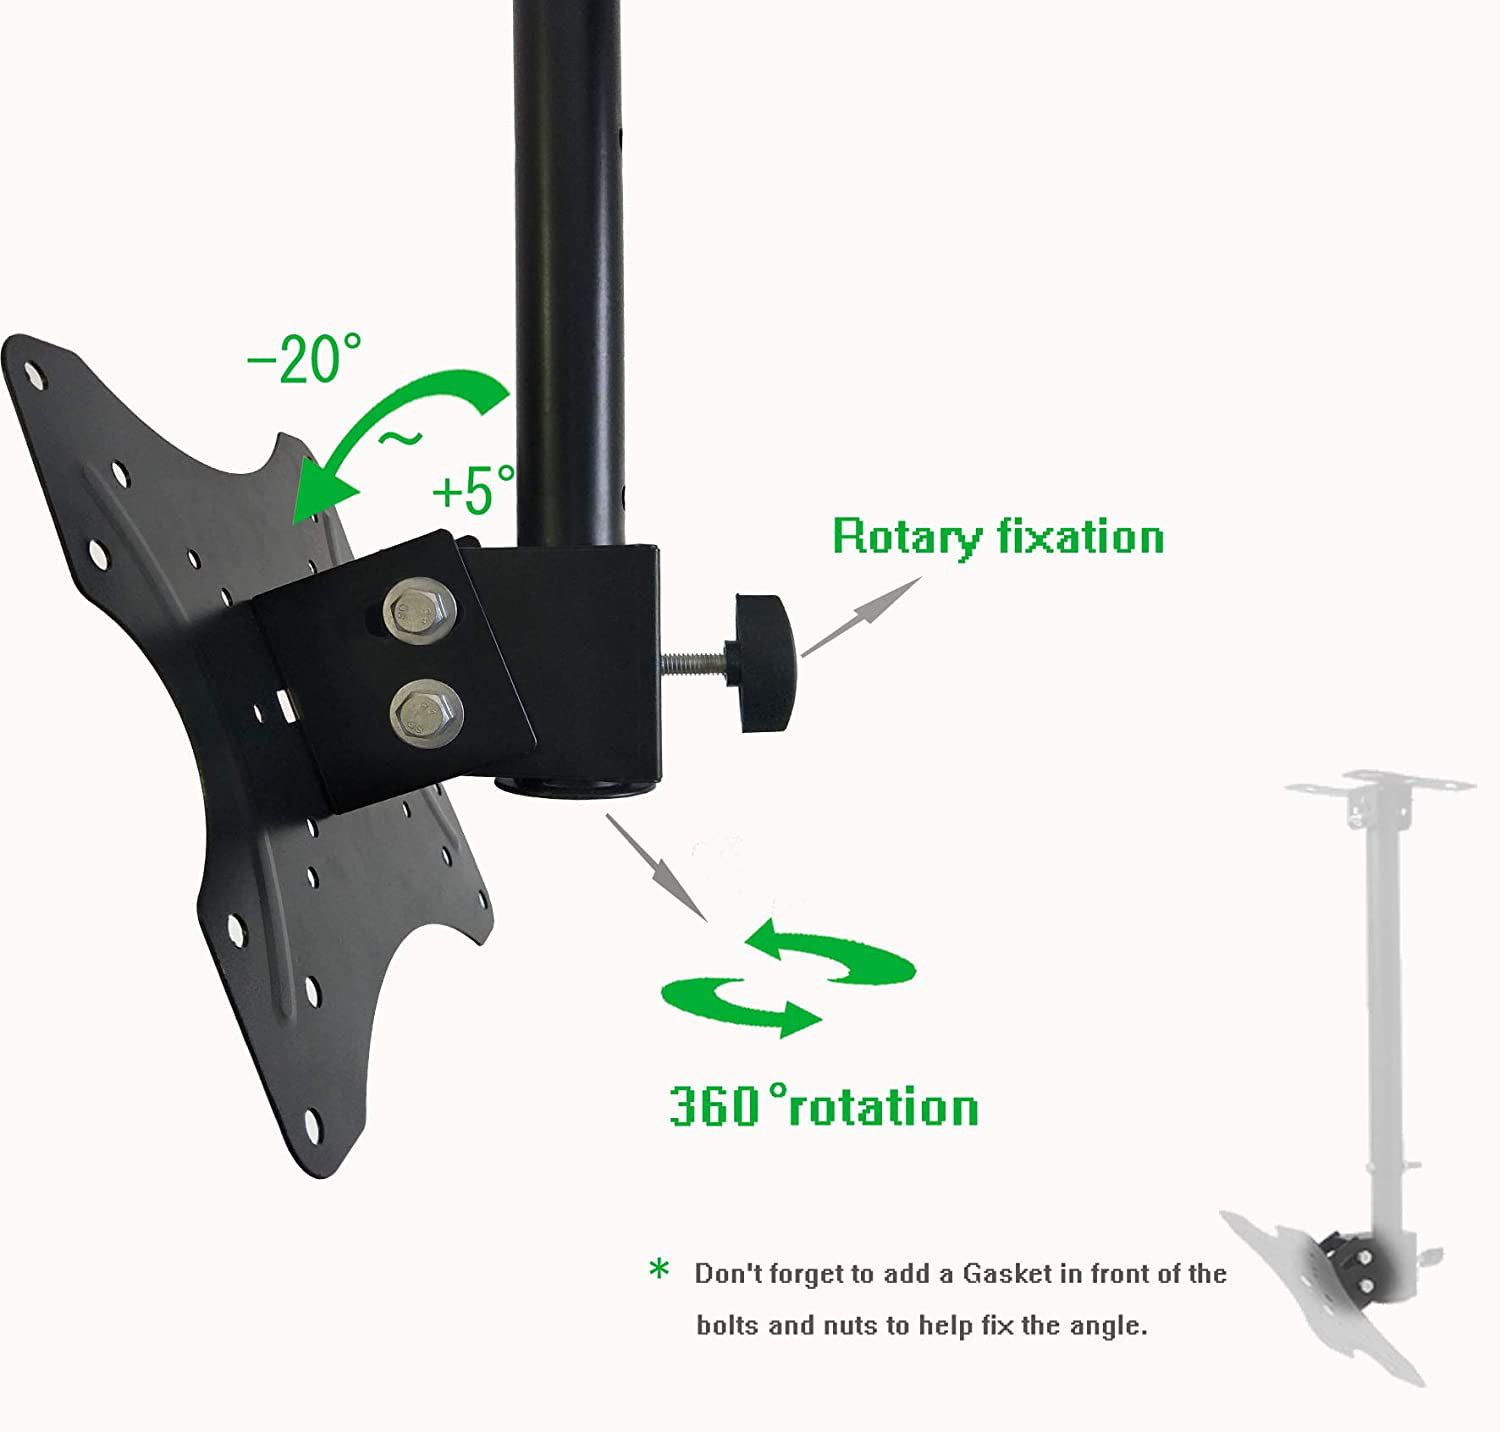 Ceiling TV Mount,TV Ceiling Mount Adjustable Bracket Fits Most LED, LCD,  OLED and Plasma Flat Screen Display 14 to 32 Inch, up to 66 Lbs, VESA  200x200mm 